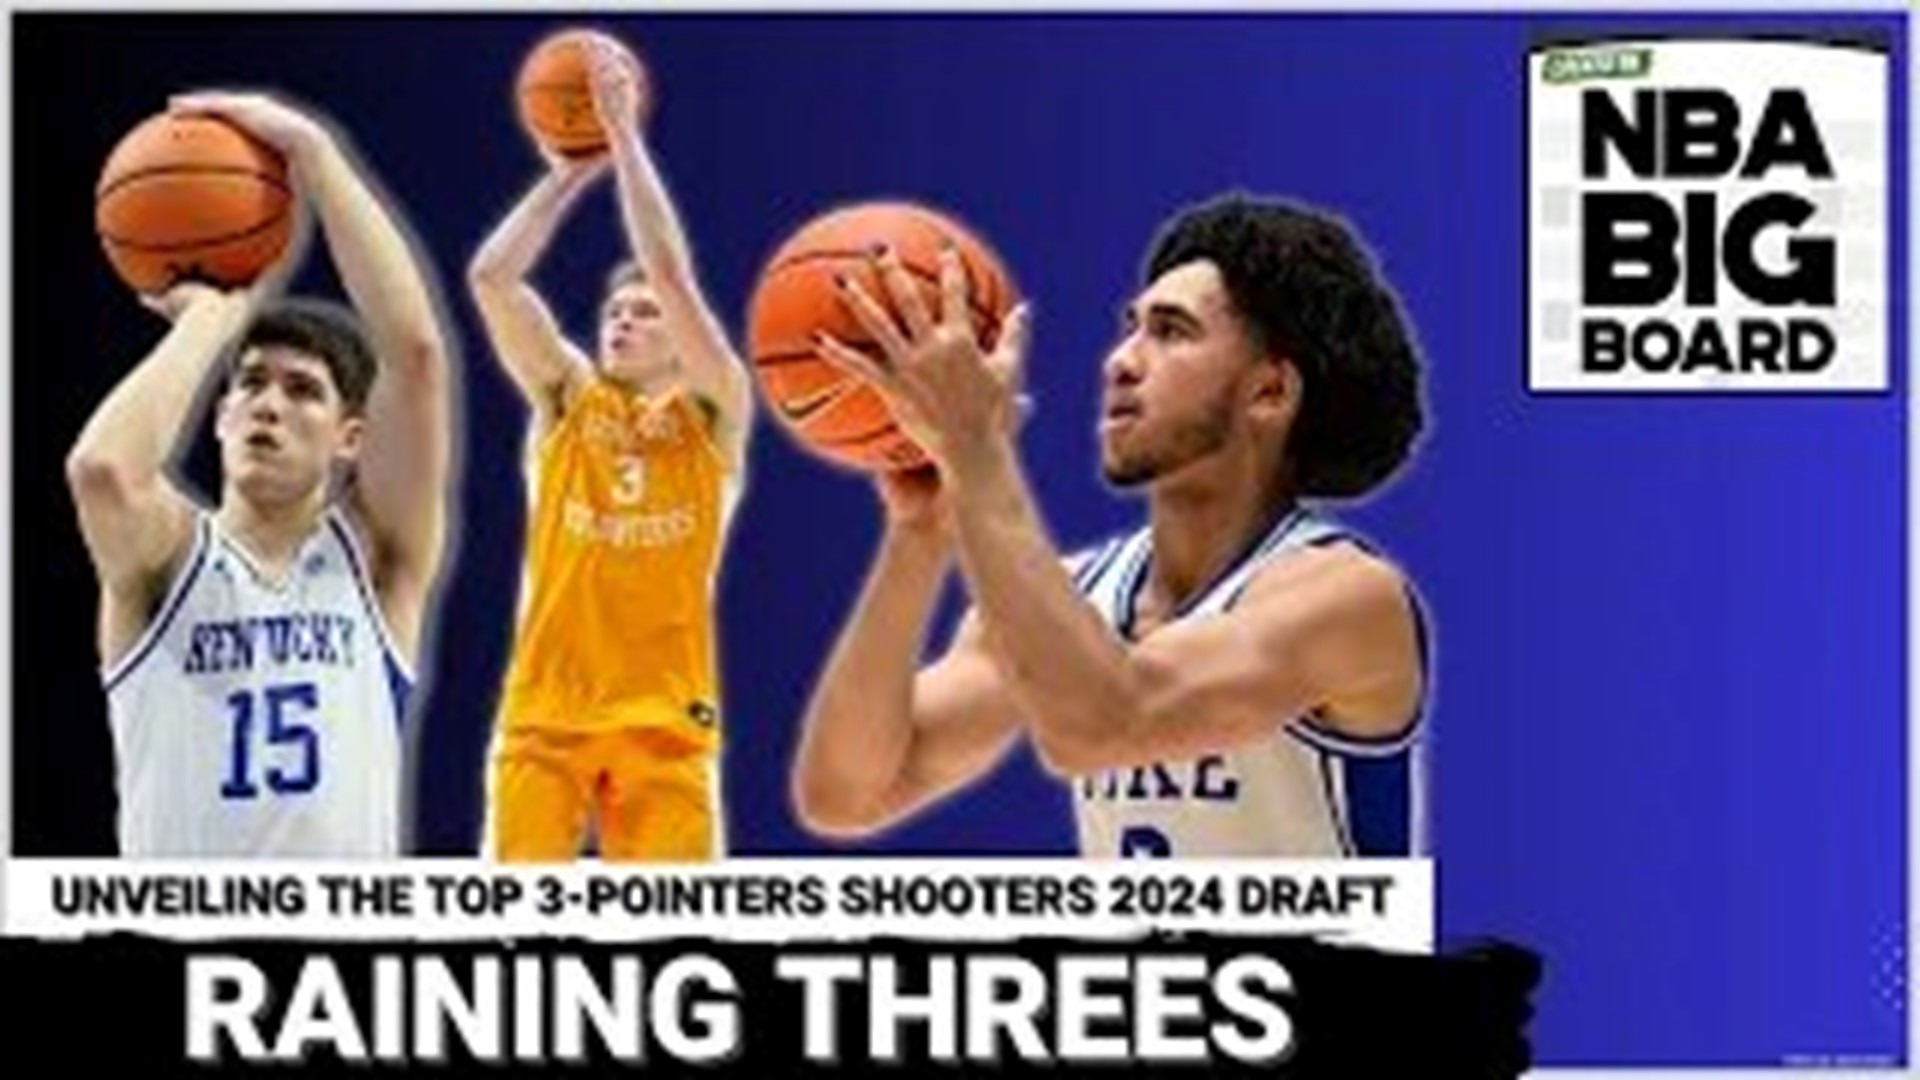 In this installment of the Locked On NBA Big Board podcast, Richard Stayman and Leif Thulin discuss their views on three top sharpshooting prospects in the draft.